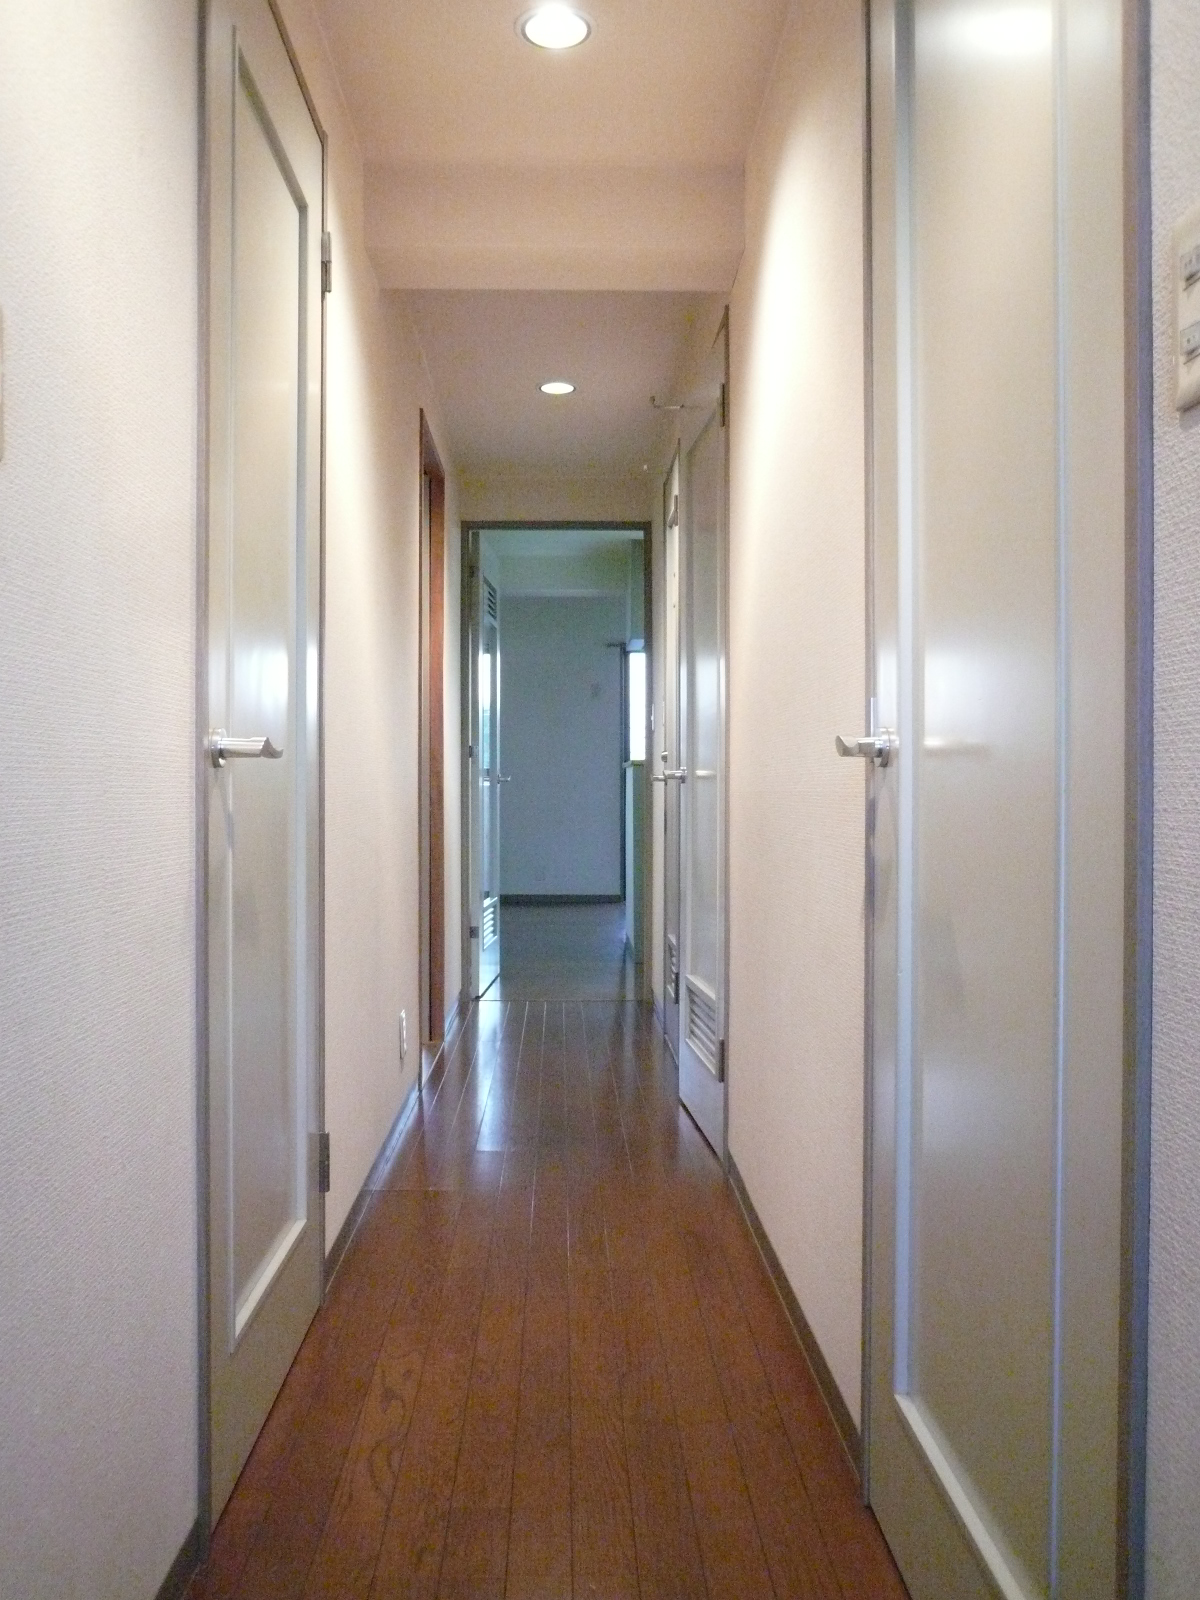 Entrance. Entrance ・ Corridor  The same type ・ It will be in a separate dwelling unit photos. 